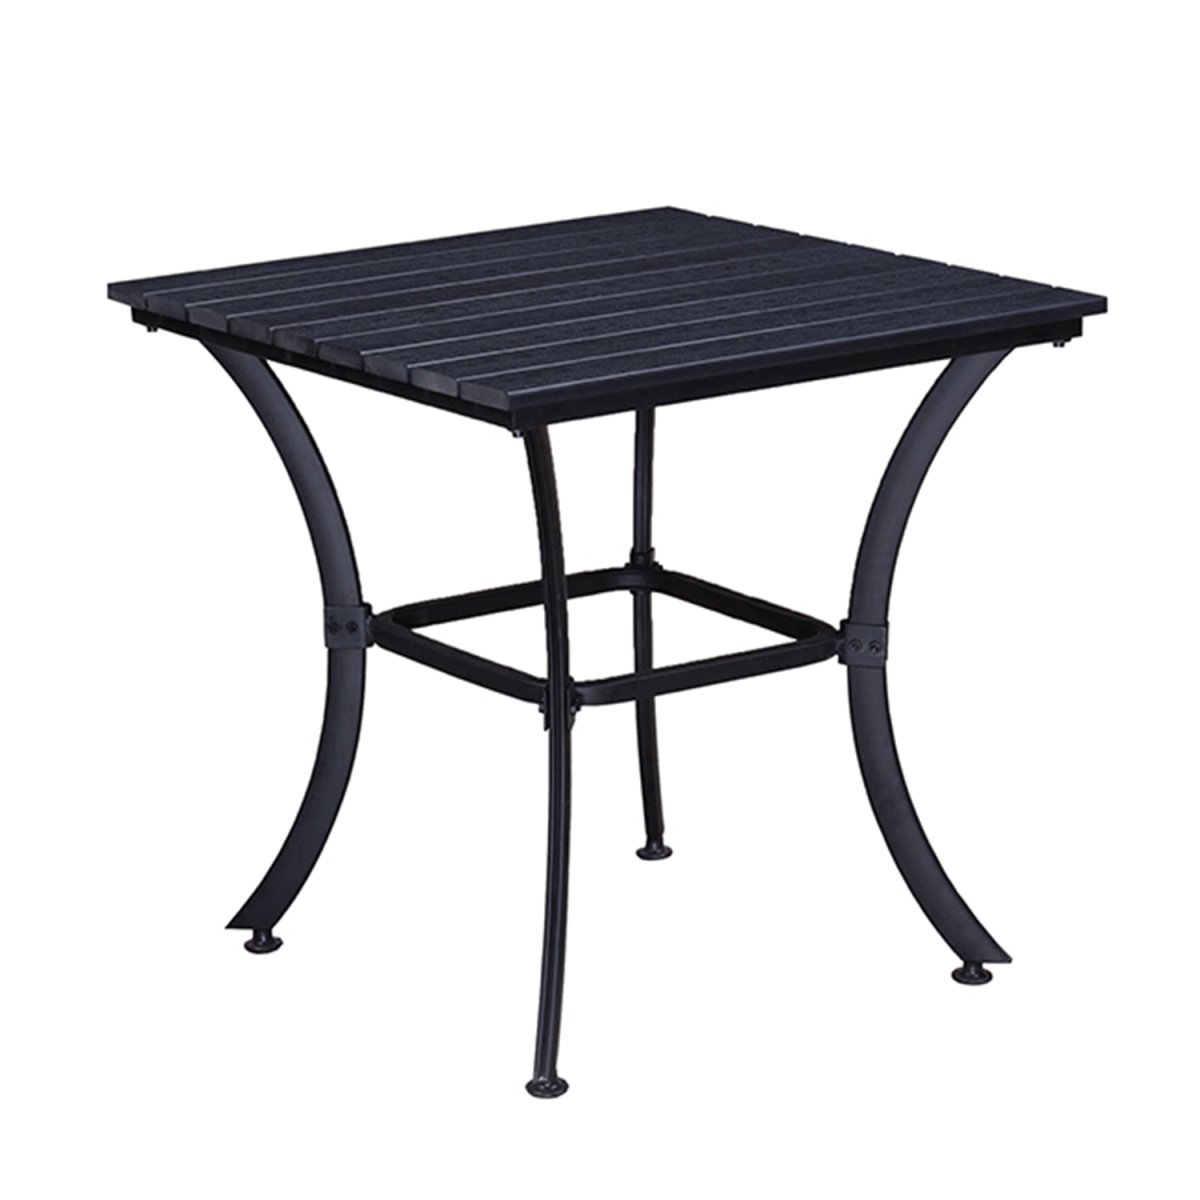 Oakland Living 904-table-bk 25 In. Indoor & Outdoor Square Modern Contemporary Faux Wood Slatted Steel Dining Table, Black